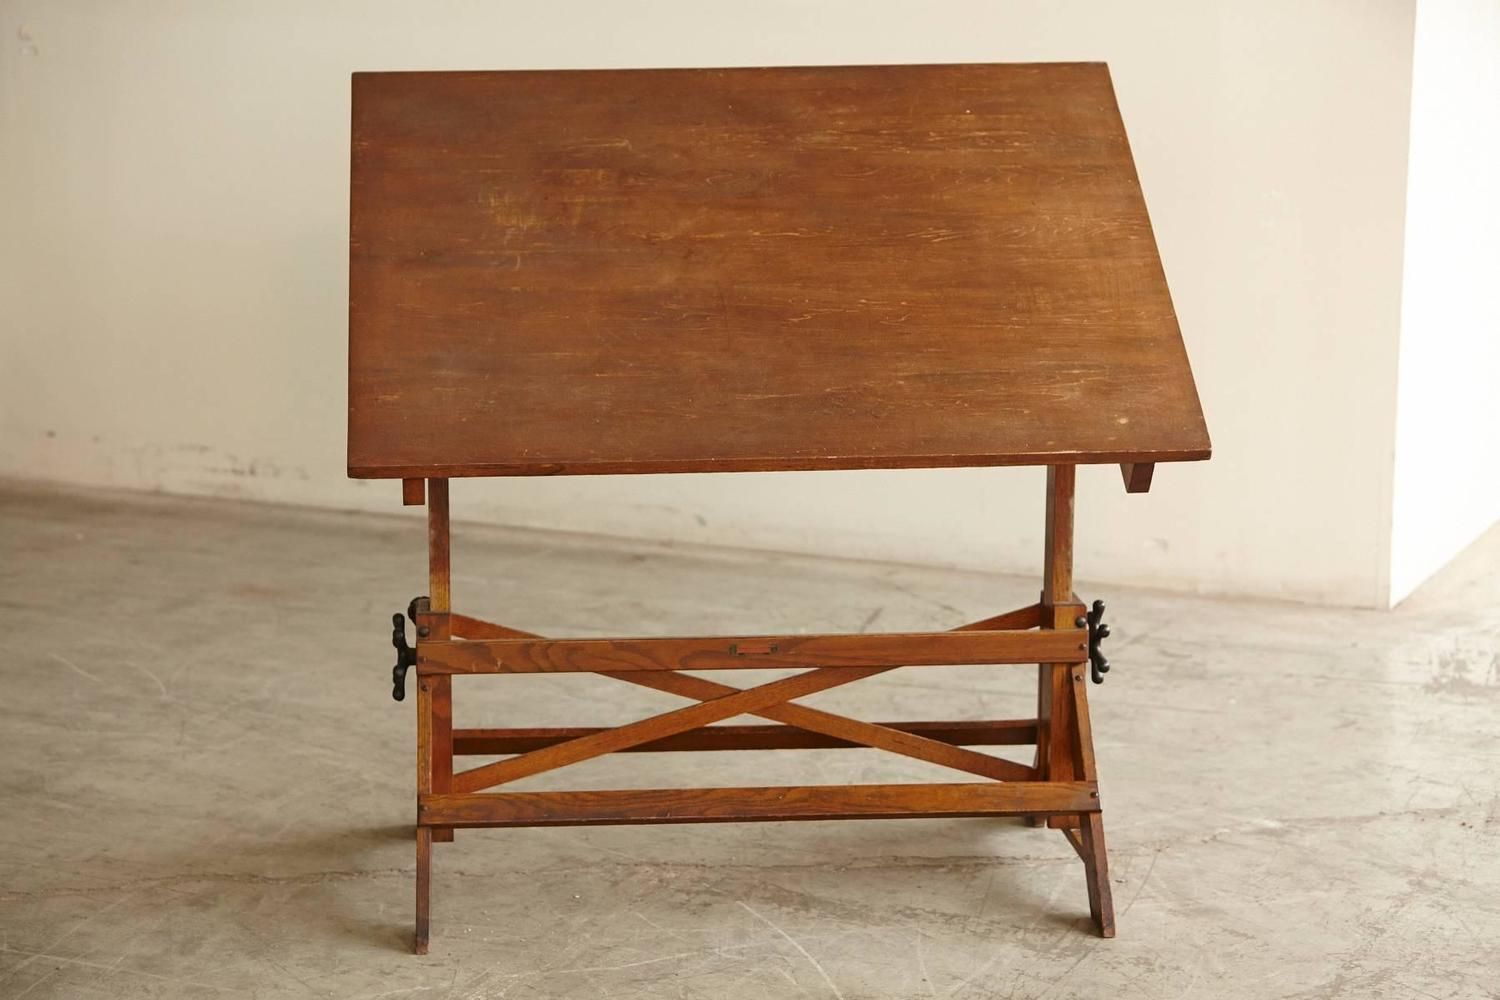 Antique Industrial American Oak Drafting Table At 1stdibs Pertaining To Weathered Oak Tilt Top Drafting Tables (View 5 of 15)